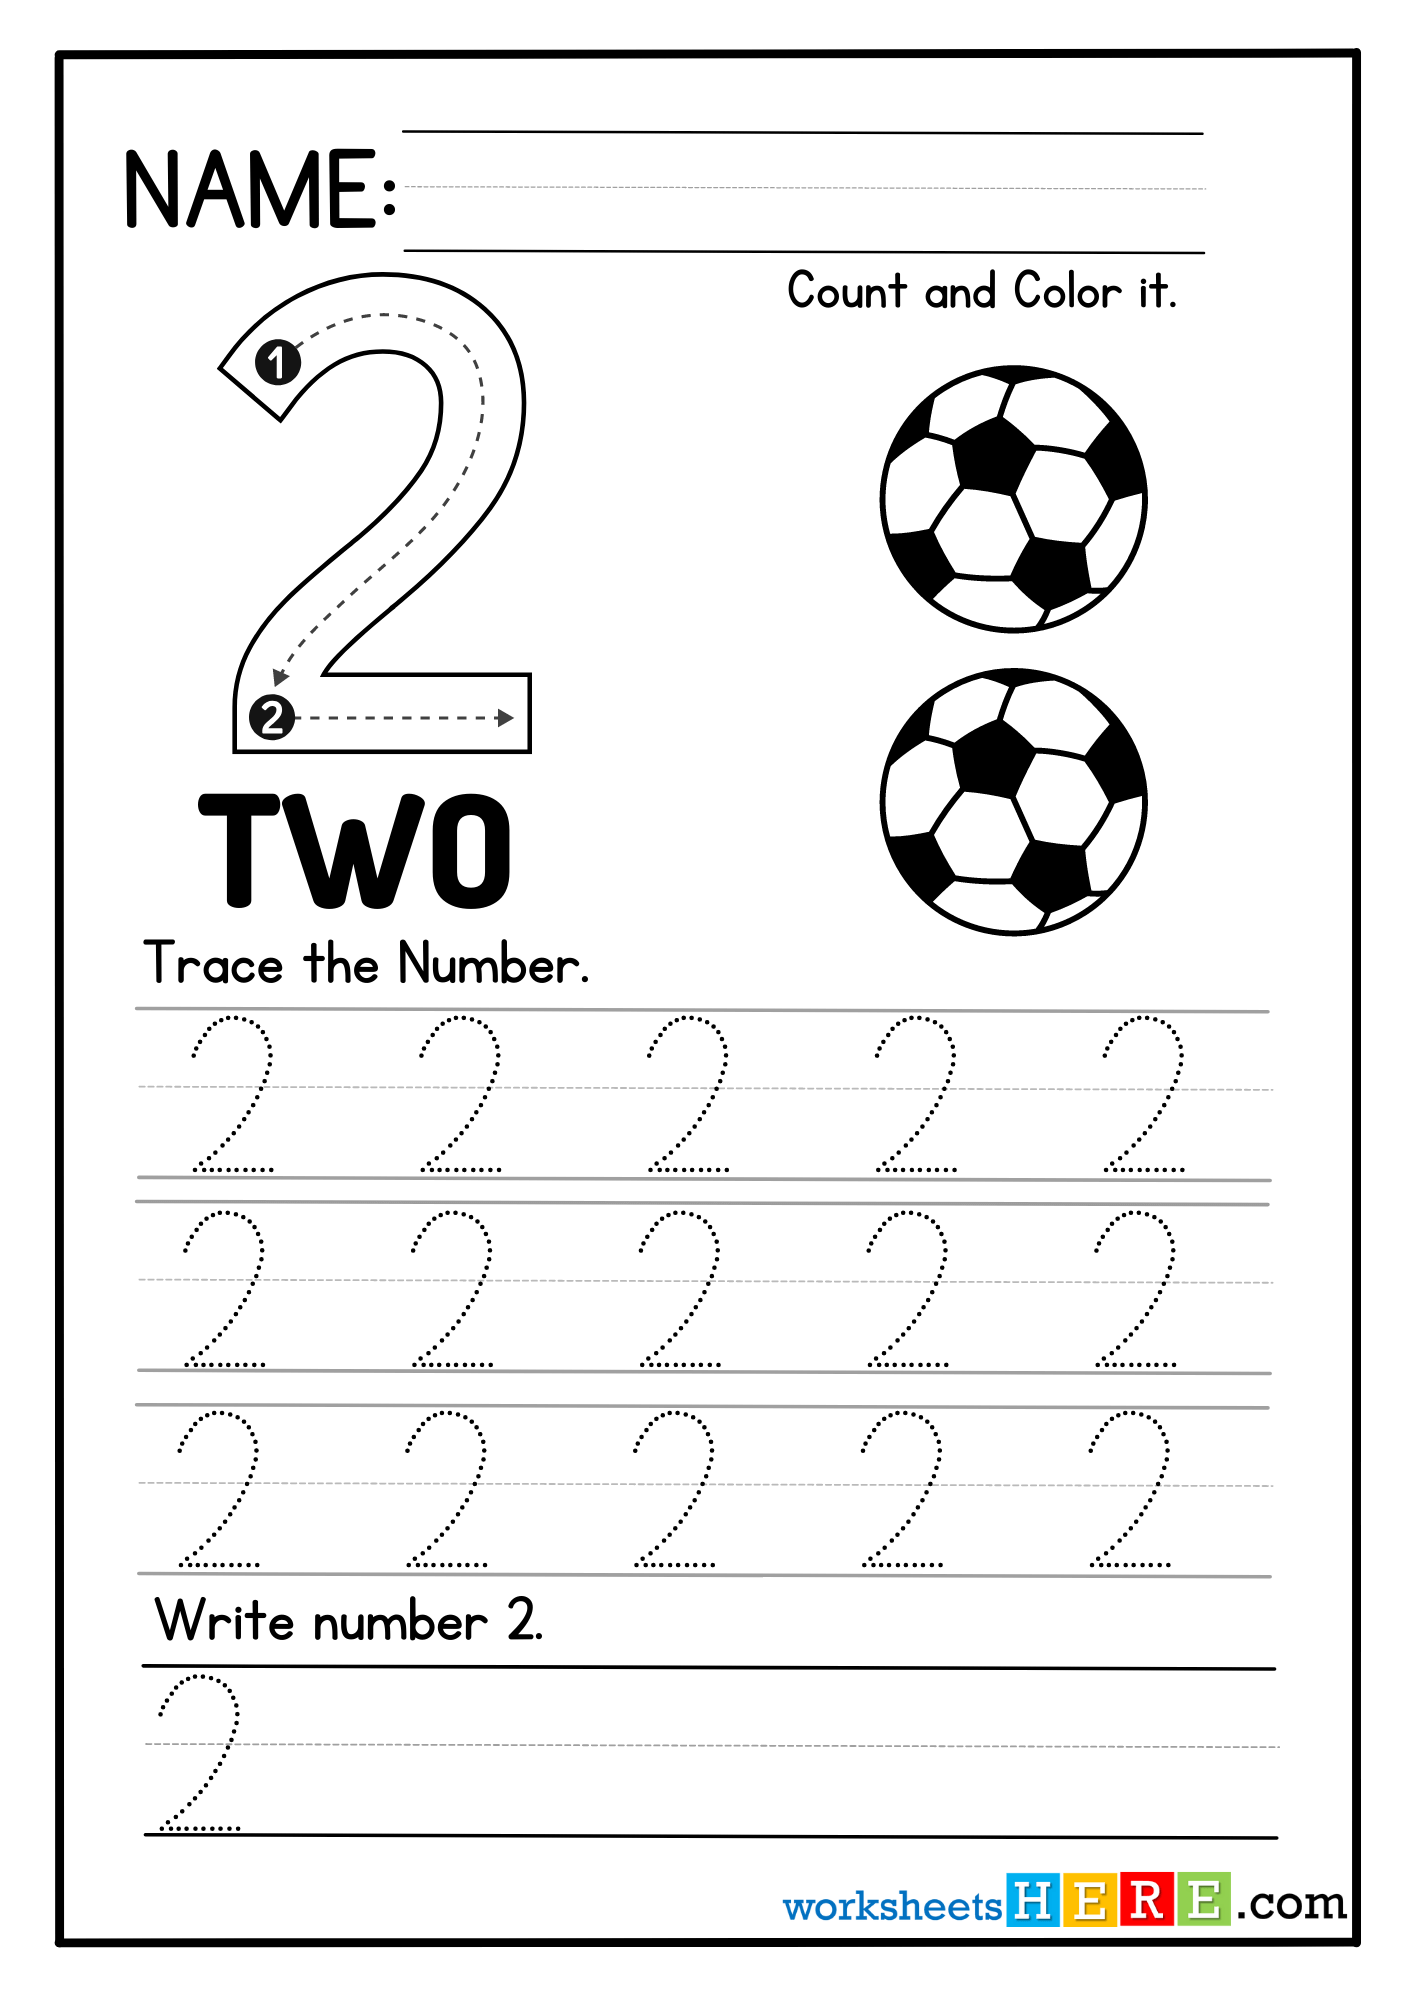 Tracing Numbers Activity, Number 2 Trace, Count and Color PDF Worksheet For Kindergarten